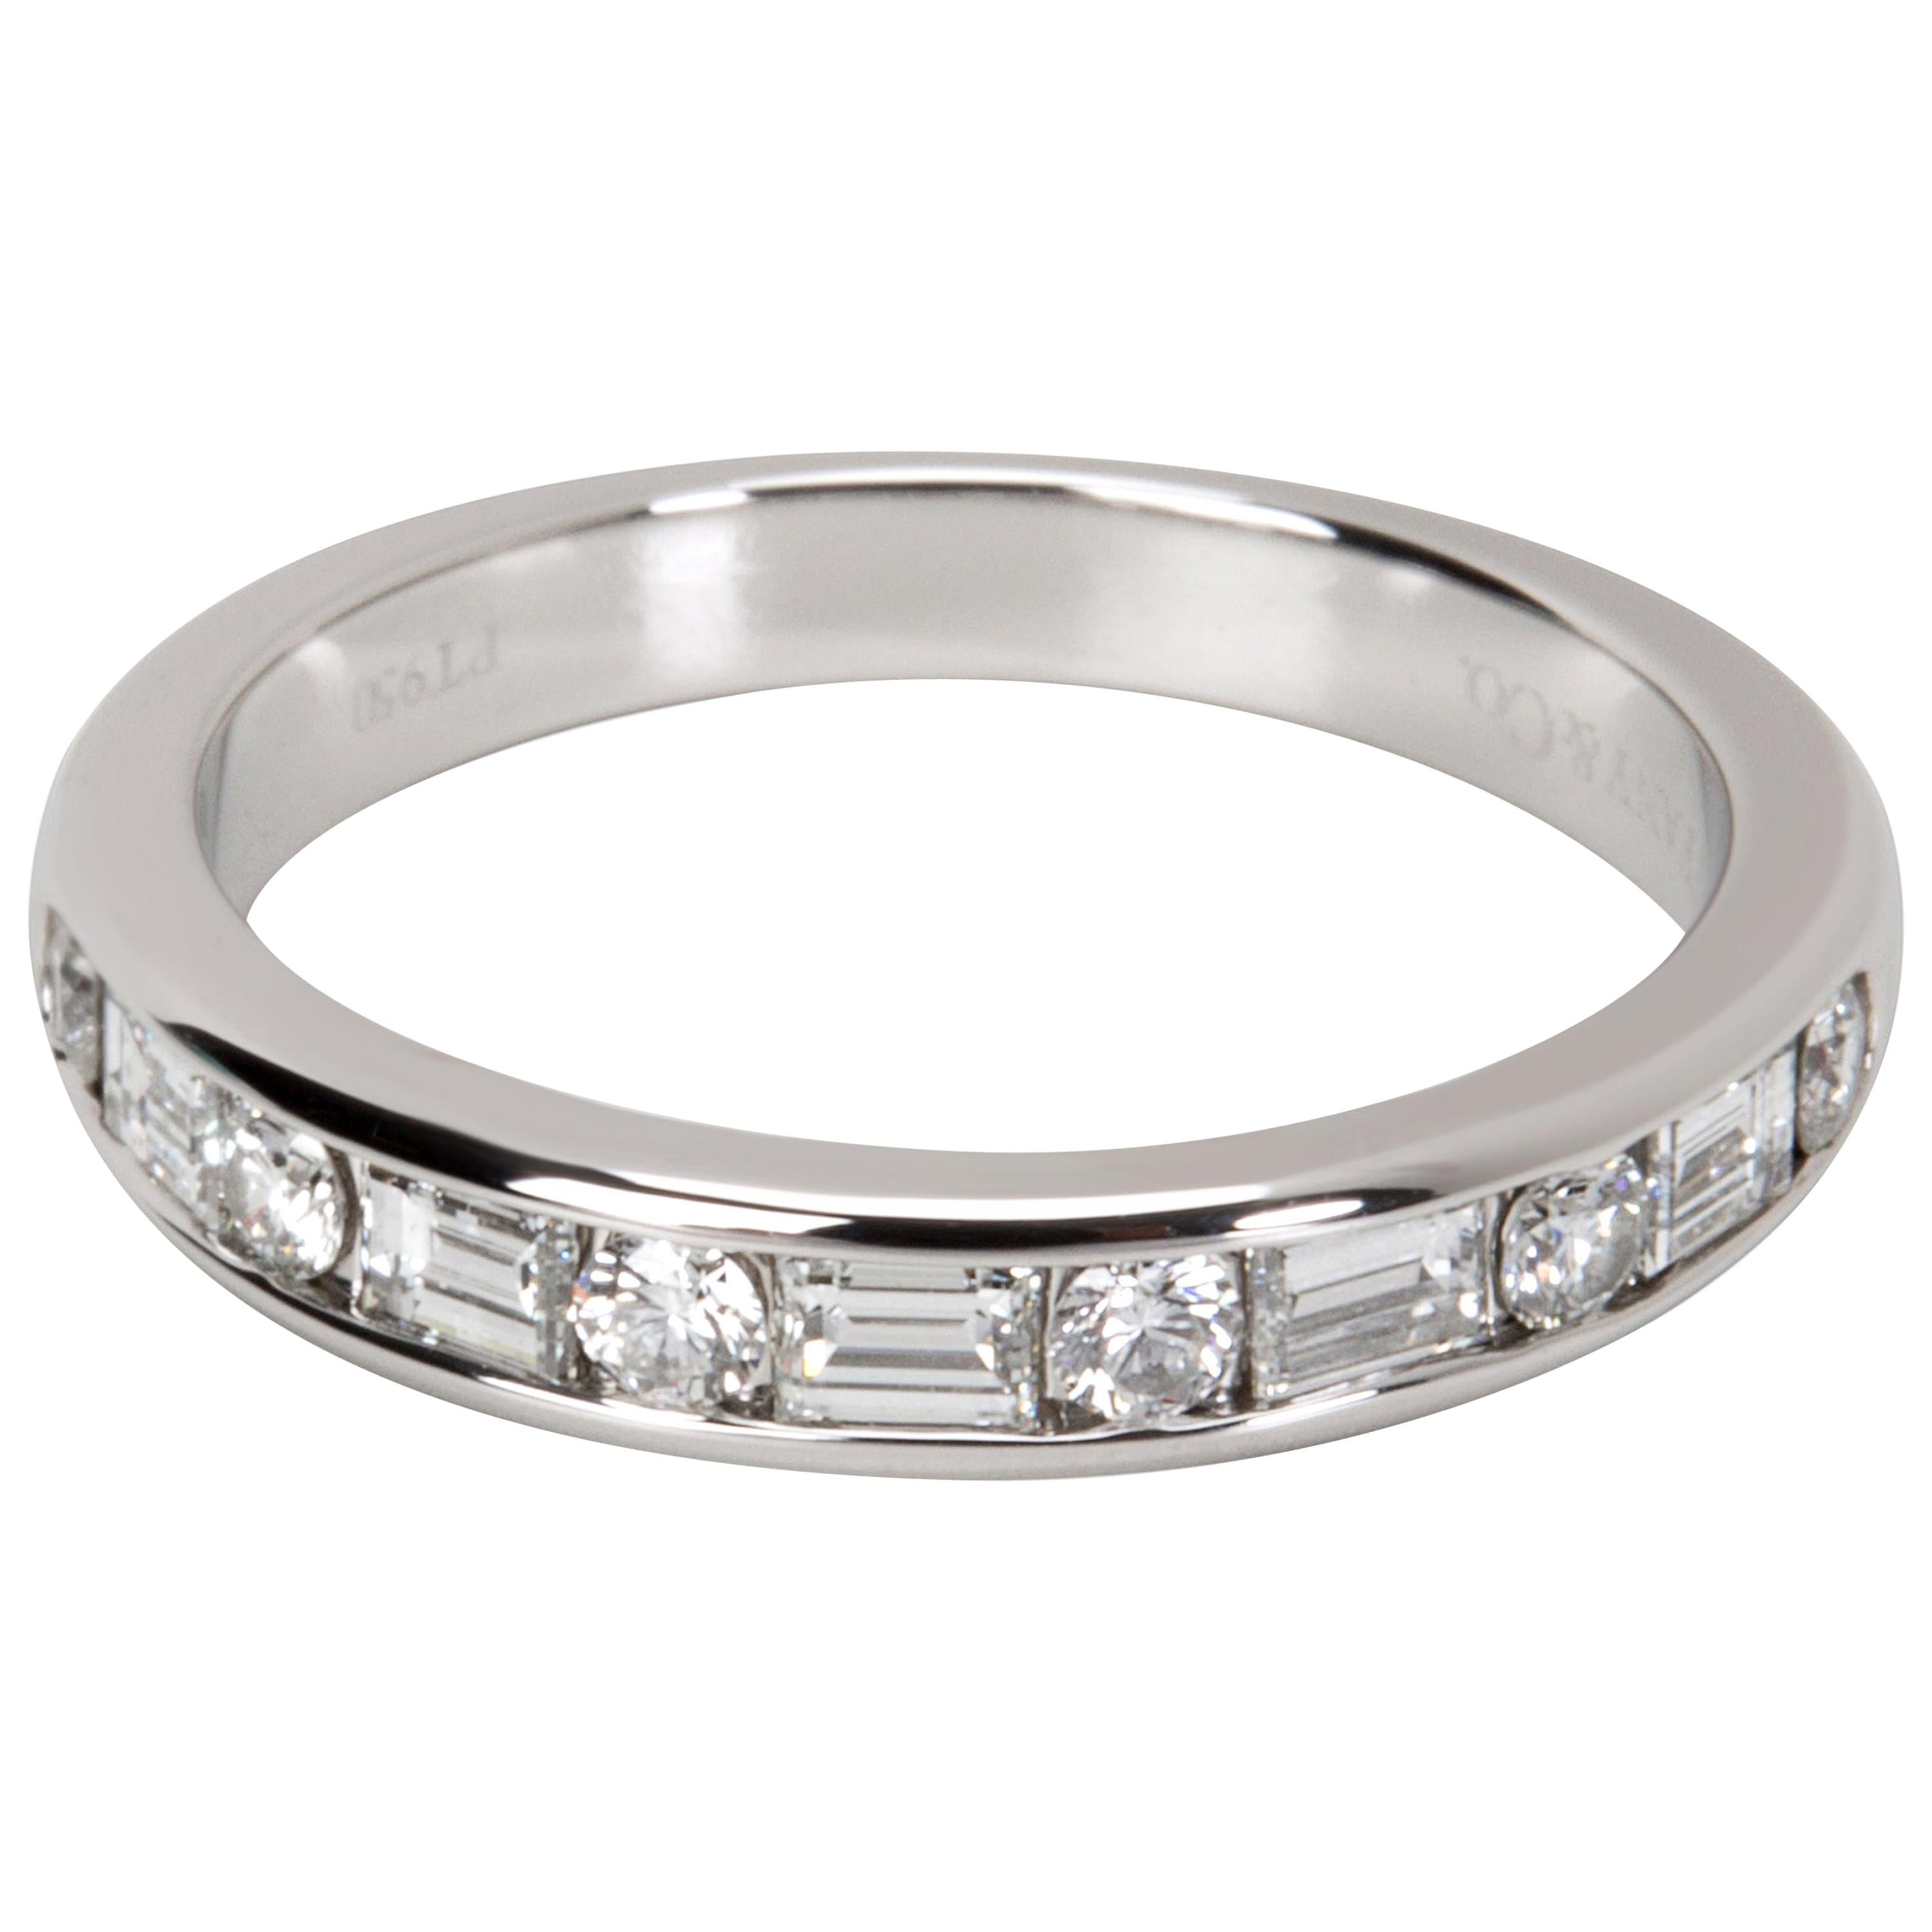 Tiffany & Co. Round and Baguette Diamond Band '3/4 Carat'